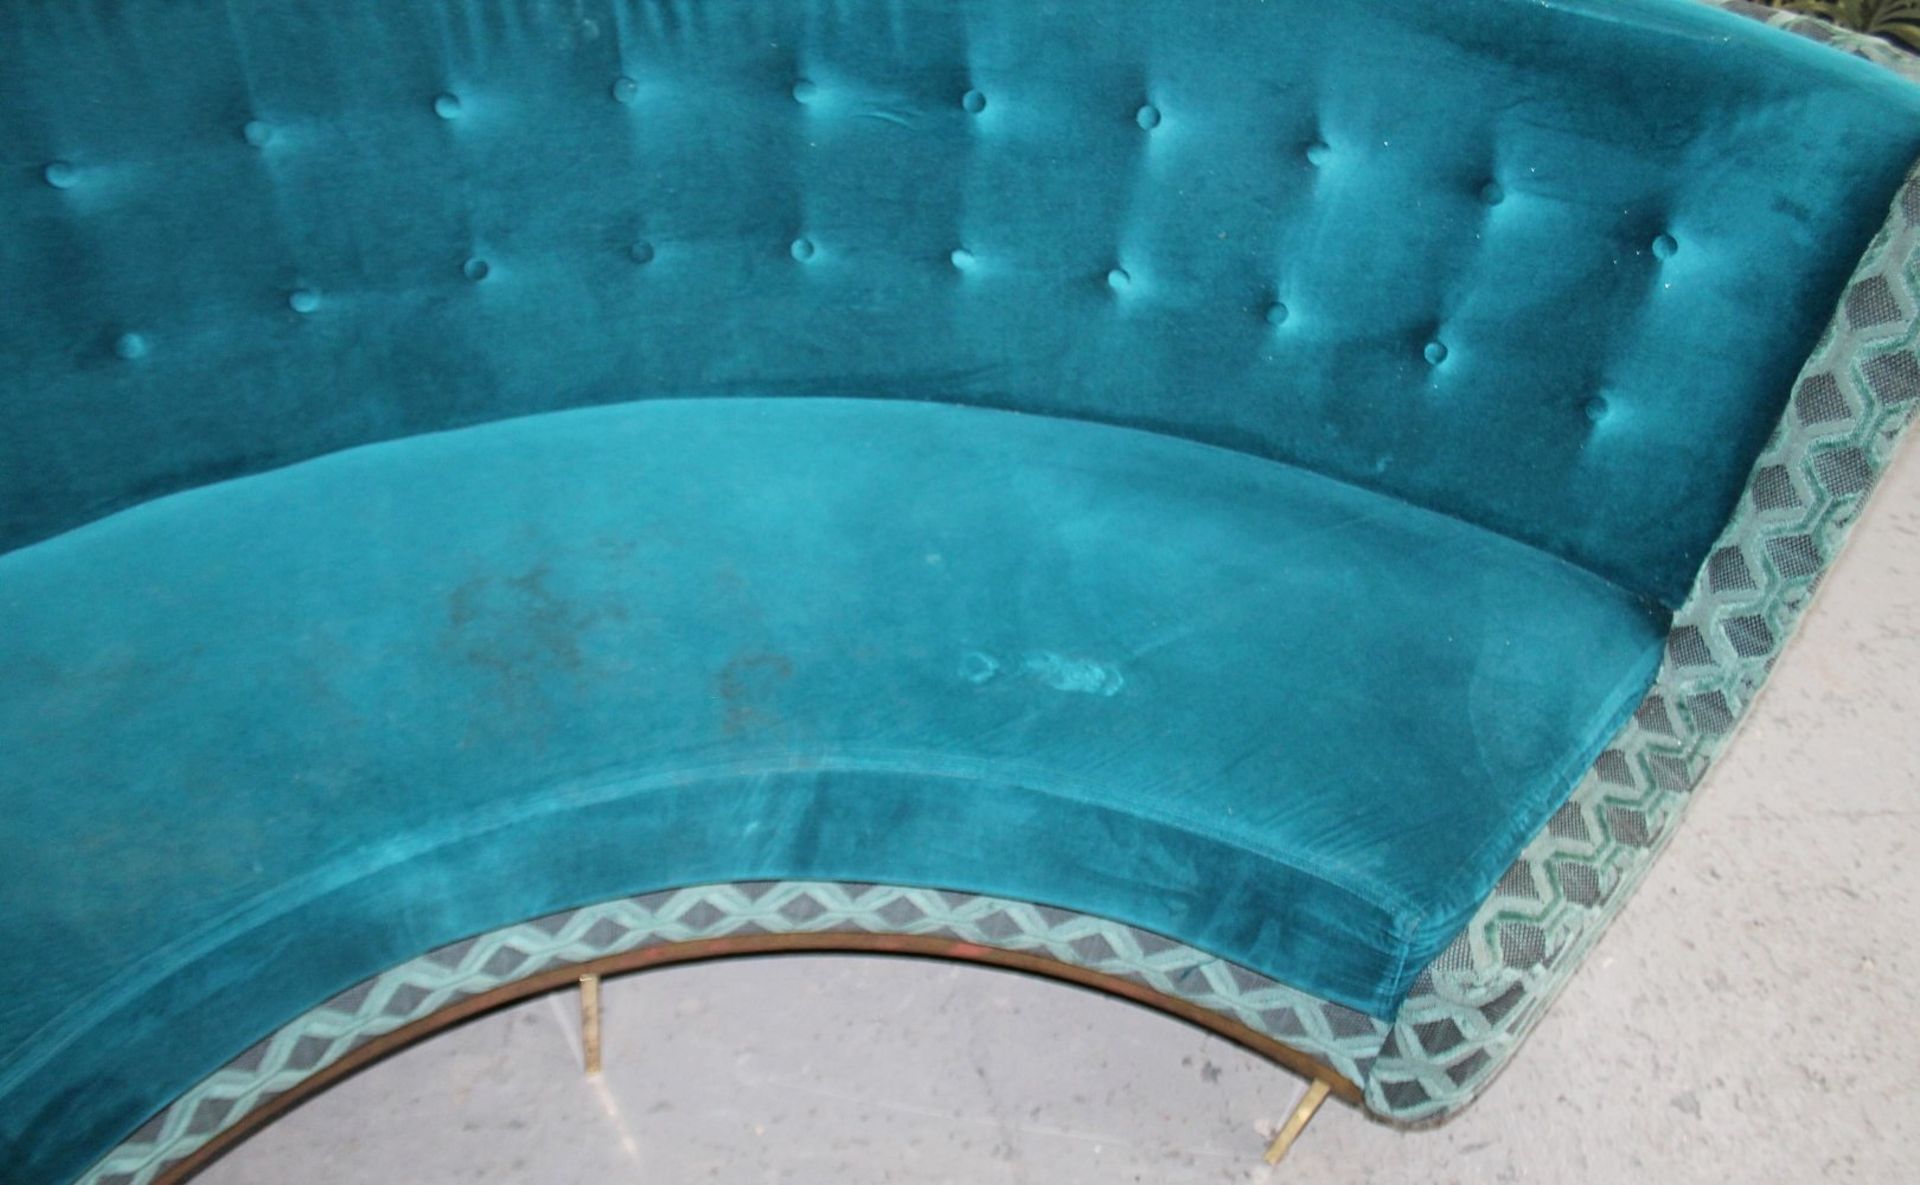 1 x Bespoke Commercial Curved C-Shaped Booth Seating Upholstered In Premium Teal Coloured Fabrics - - Image 8 of 17